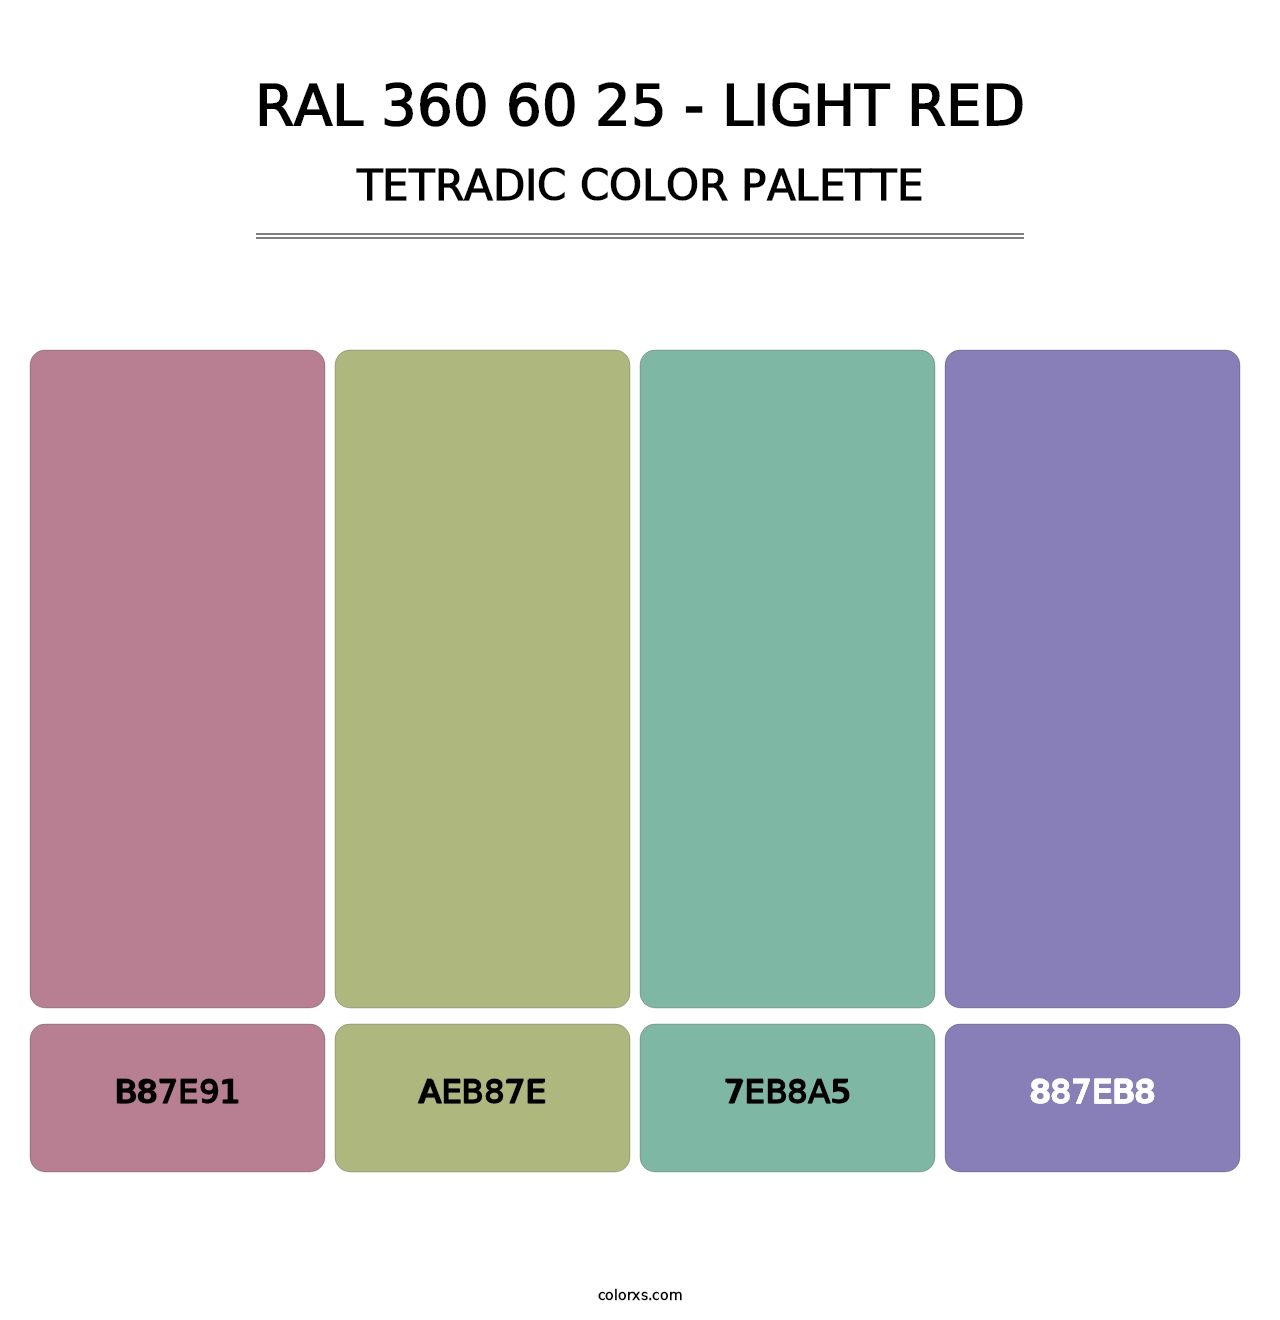 RAL 360 60 25 - Light Red - Tetradic Color Palette